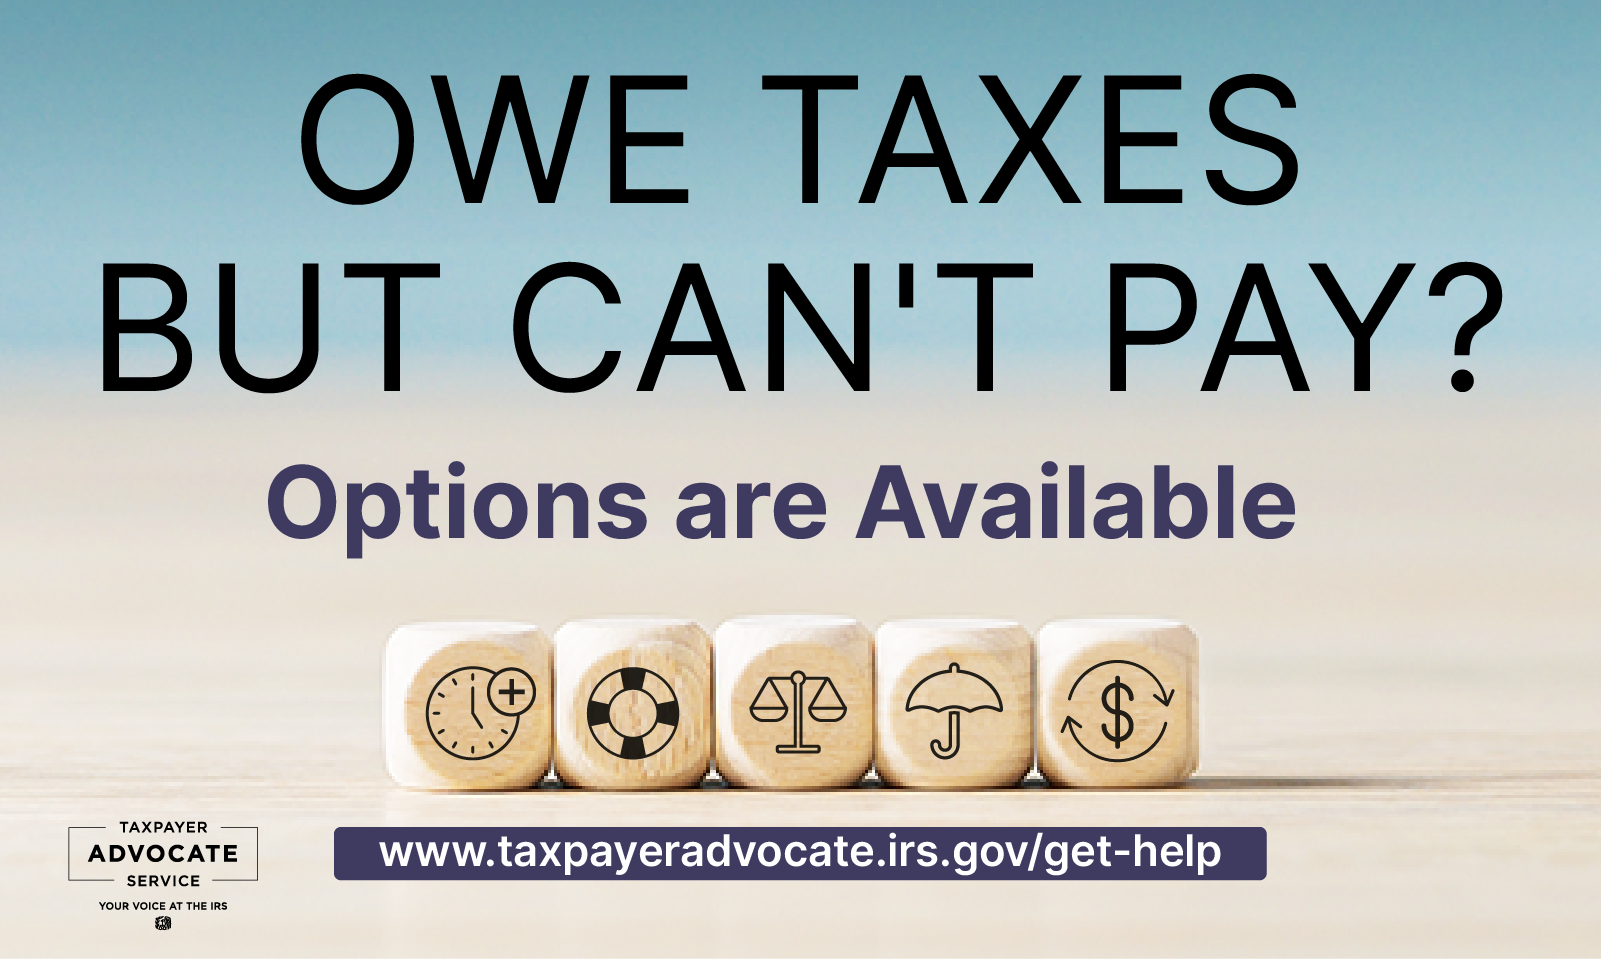 Owe taxes but can’t pay? Options are available. Five blocks in the center – block one reflects a clock, block 2 reflects a life preserver, block 3 reflects scale, block 4 reflects an umbrella, block 5 has a dollar sign.